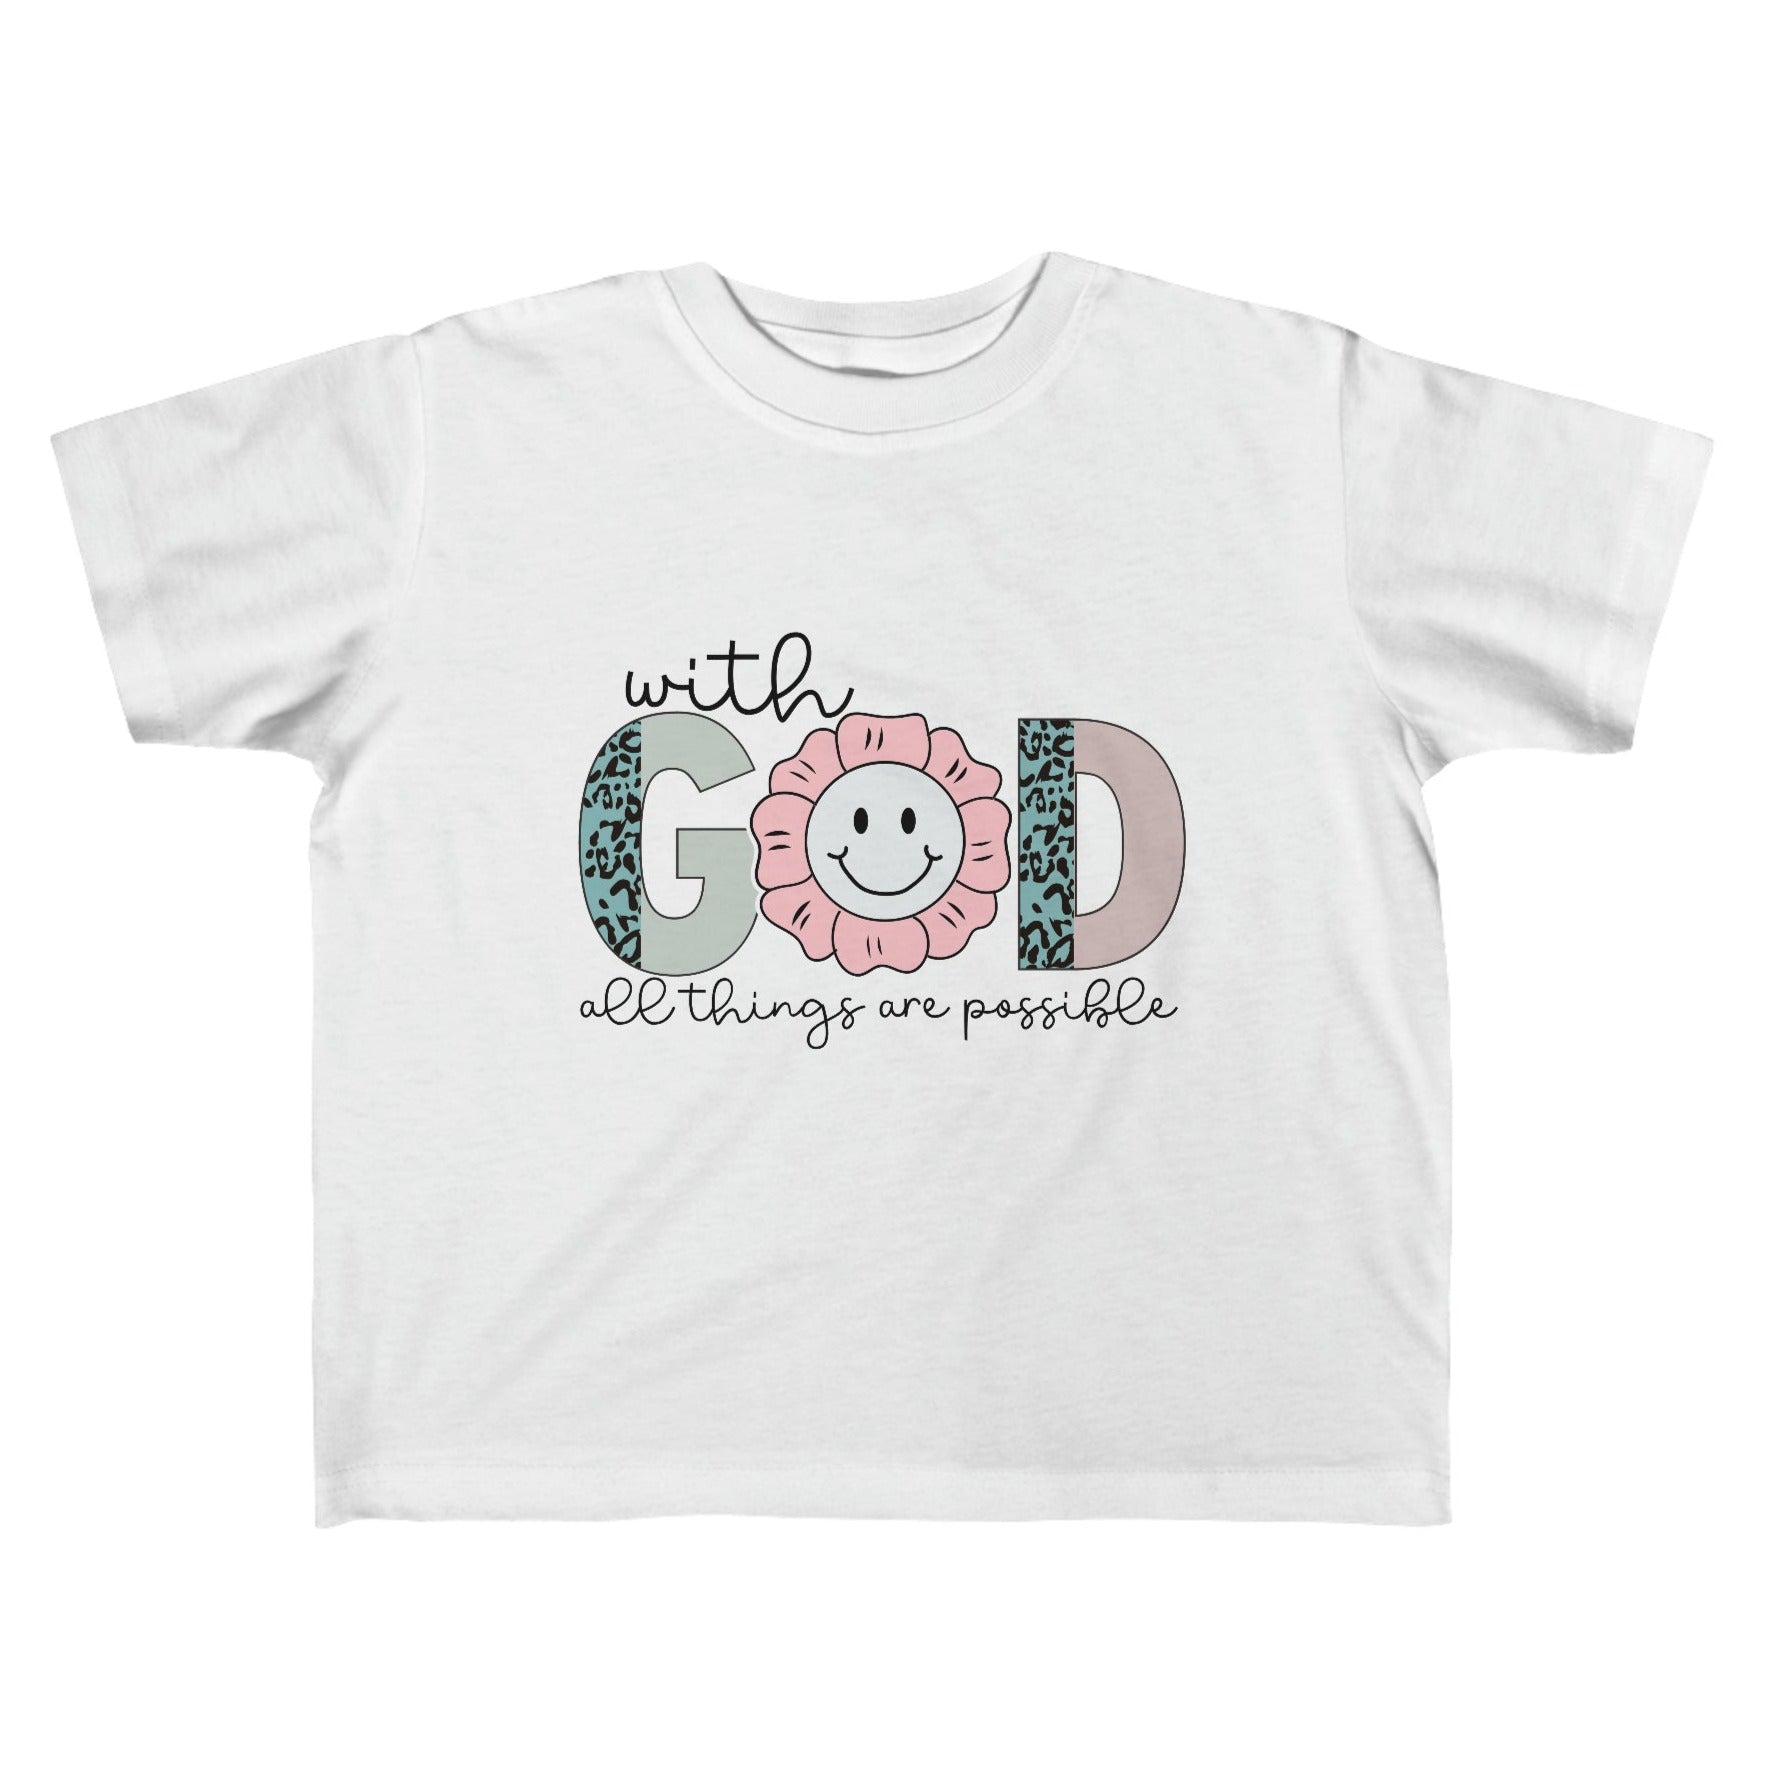 With God All Things are Possible Toddler's Fine Jersey Tee Color: White Size: 2T Jesus Passion Apparel